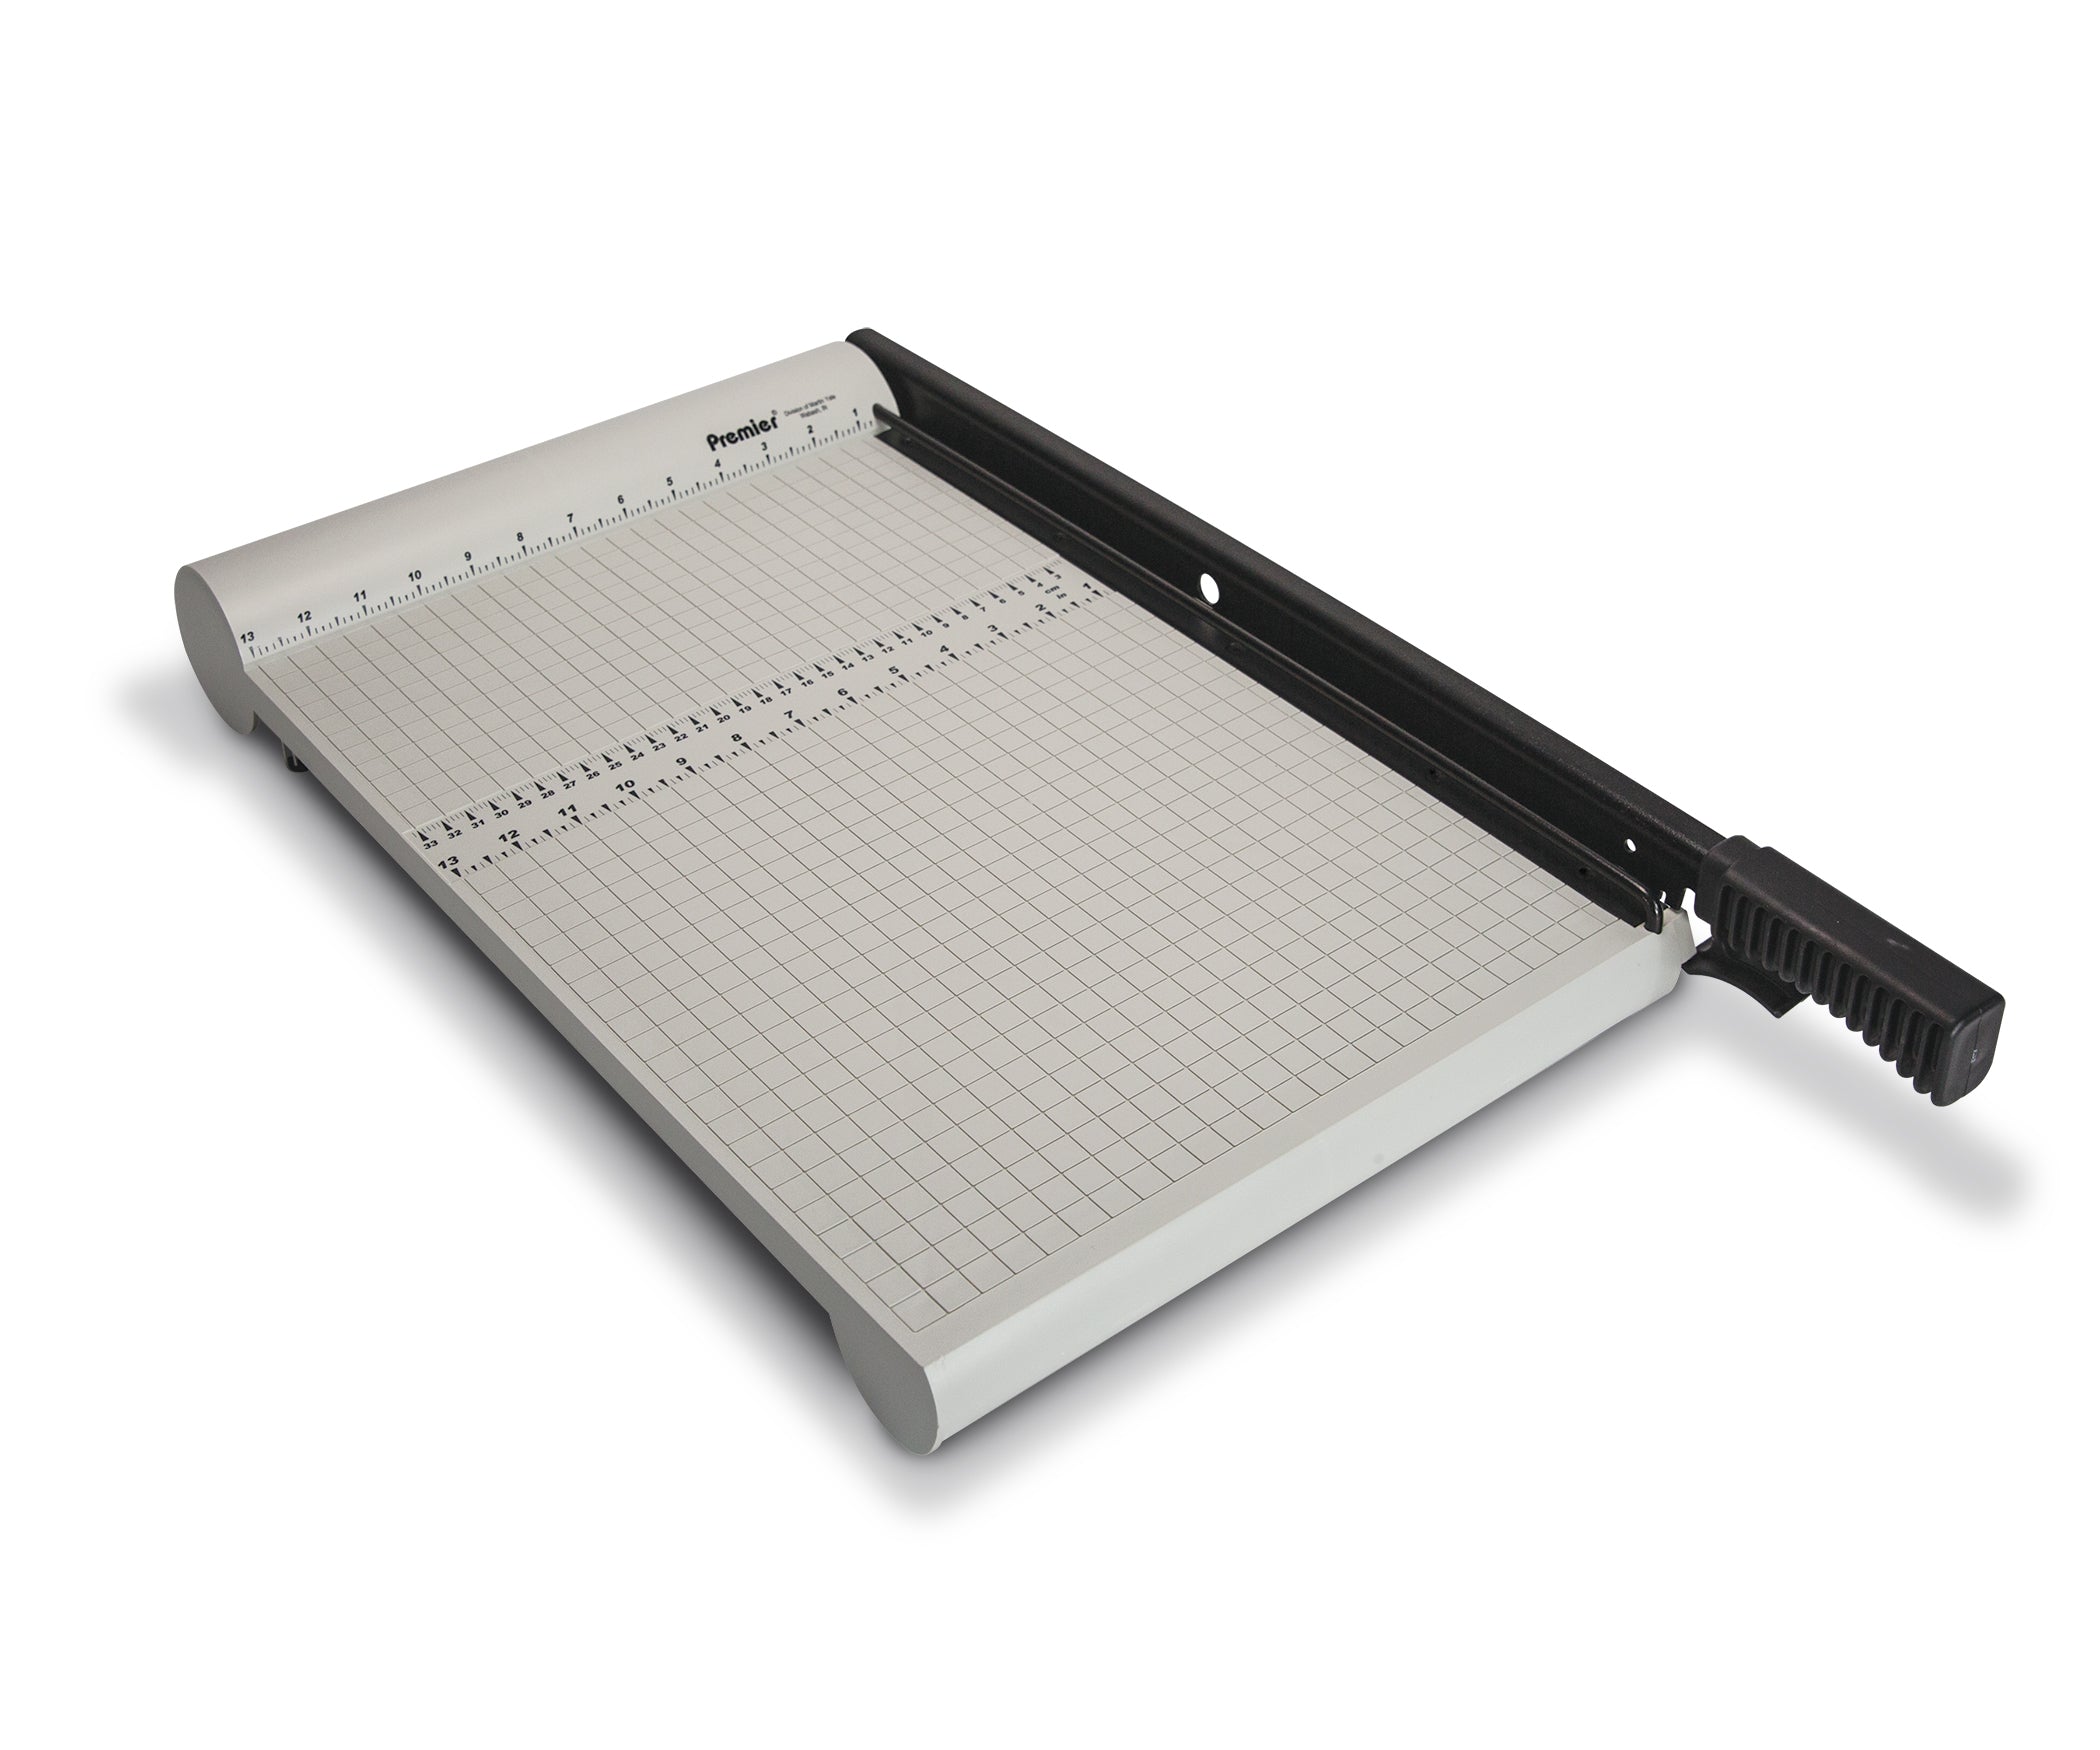 Martin Yale Premier PolyBoard 18" Paper Trimmer